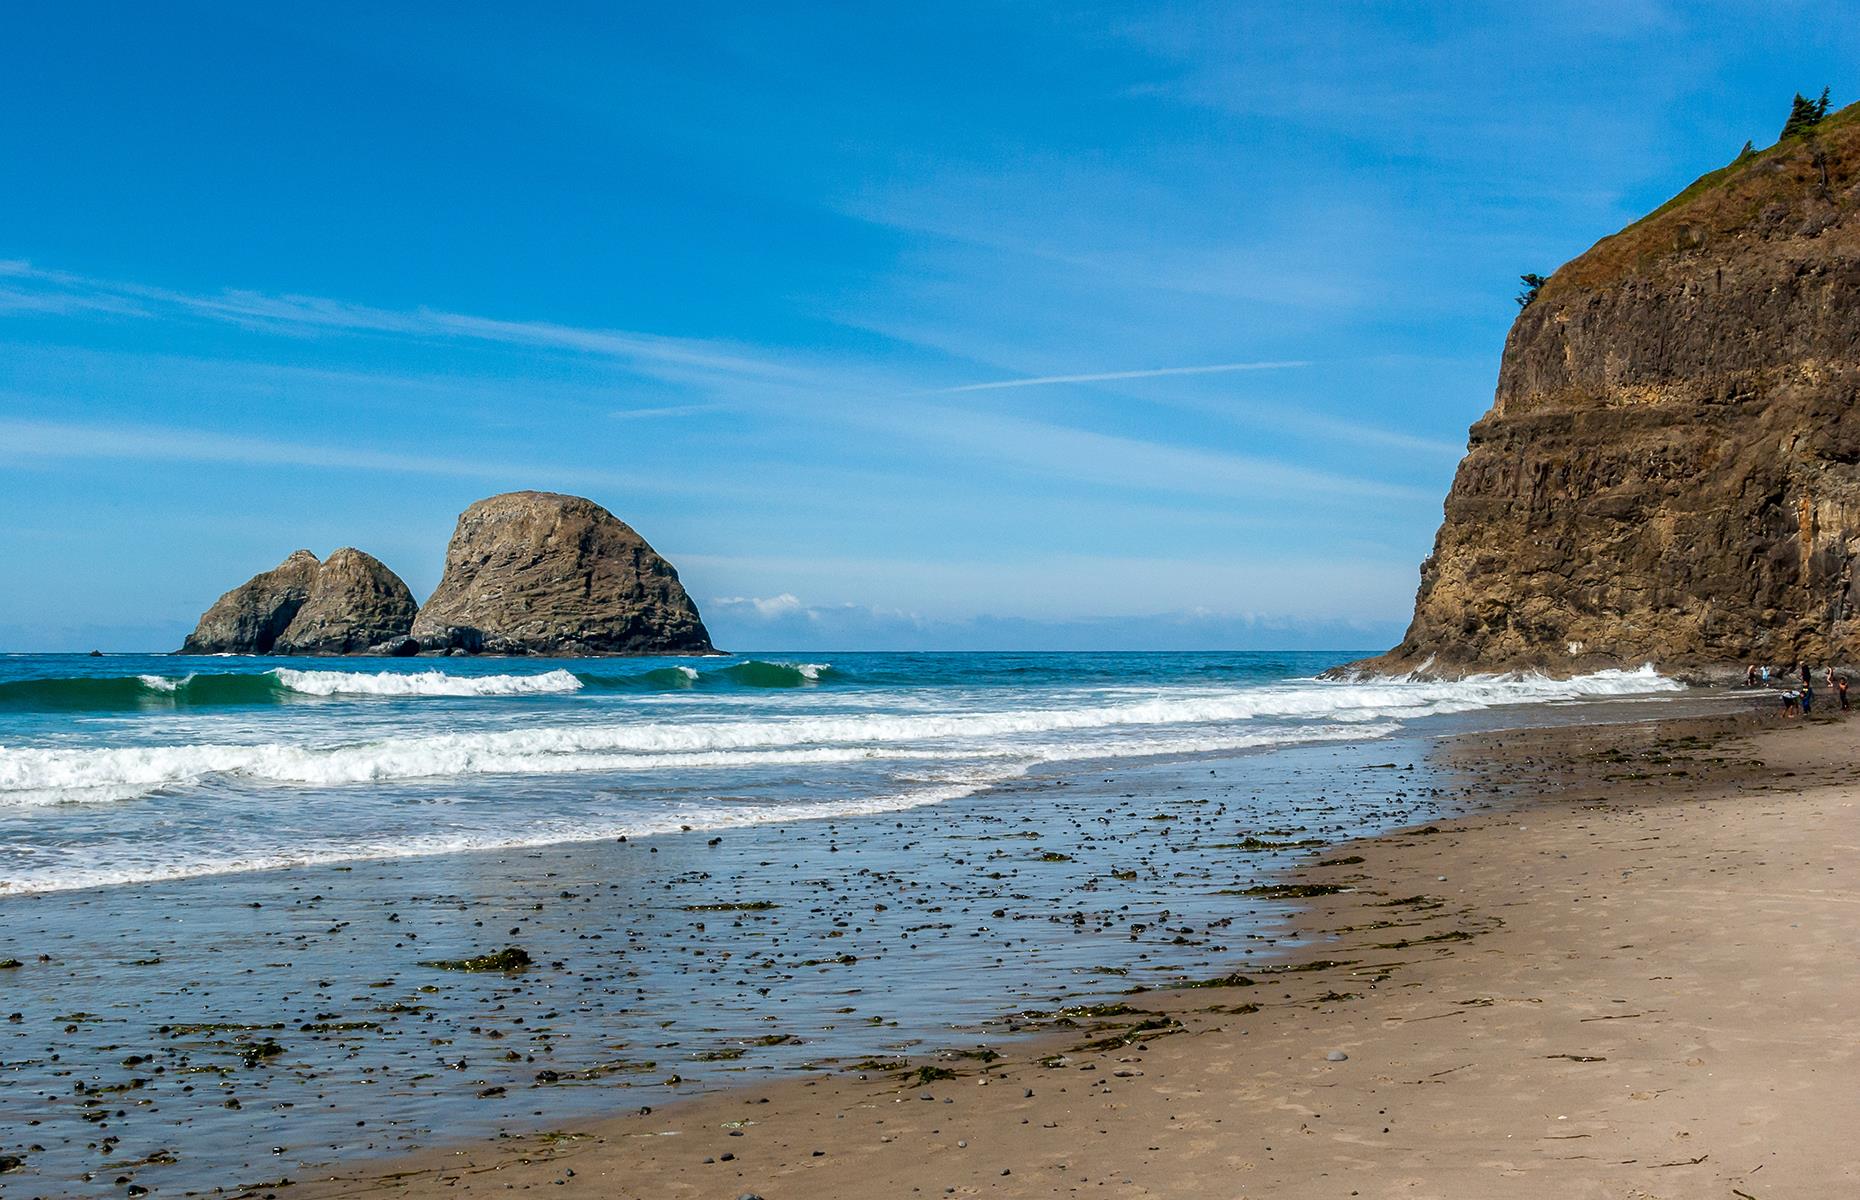 <p>Dubbed as the place where 'mountains meet the sea', Rockaway Beach is surrounded by incredible natural beauty, namely the Twin Rocks (pictured). Once you've spent time on the beach, check out the <a href="https://stateparks.oregon.gov/index.cfm?do=park.profile&parkId=131">Cape Meares State Scenic Viewpoint</a>, as well as the lighthouse (temporarily closed), then head into town. During summer, the nearby <a href="https://www.tillamook.com/creamery.html#general">Tillamook Creamery</a> is the place to visit for its ice cream and cheese, while in winter you'll get to enjoy the fresh crab fishermen harvest in December. </p>